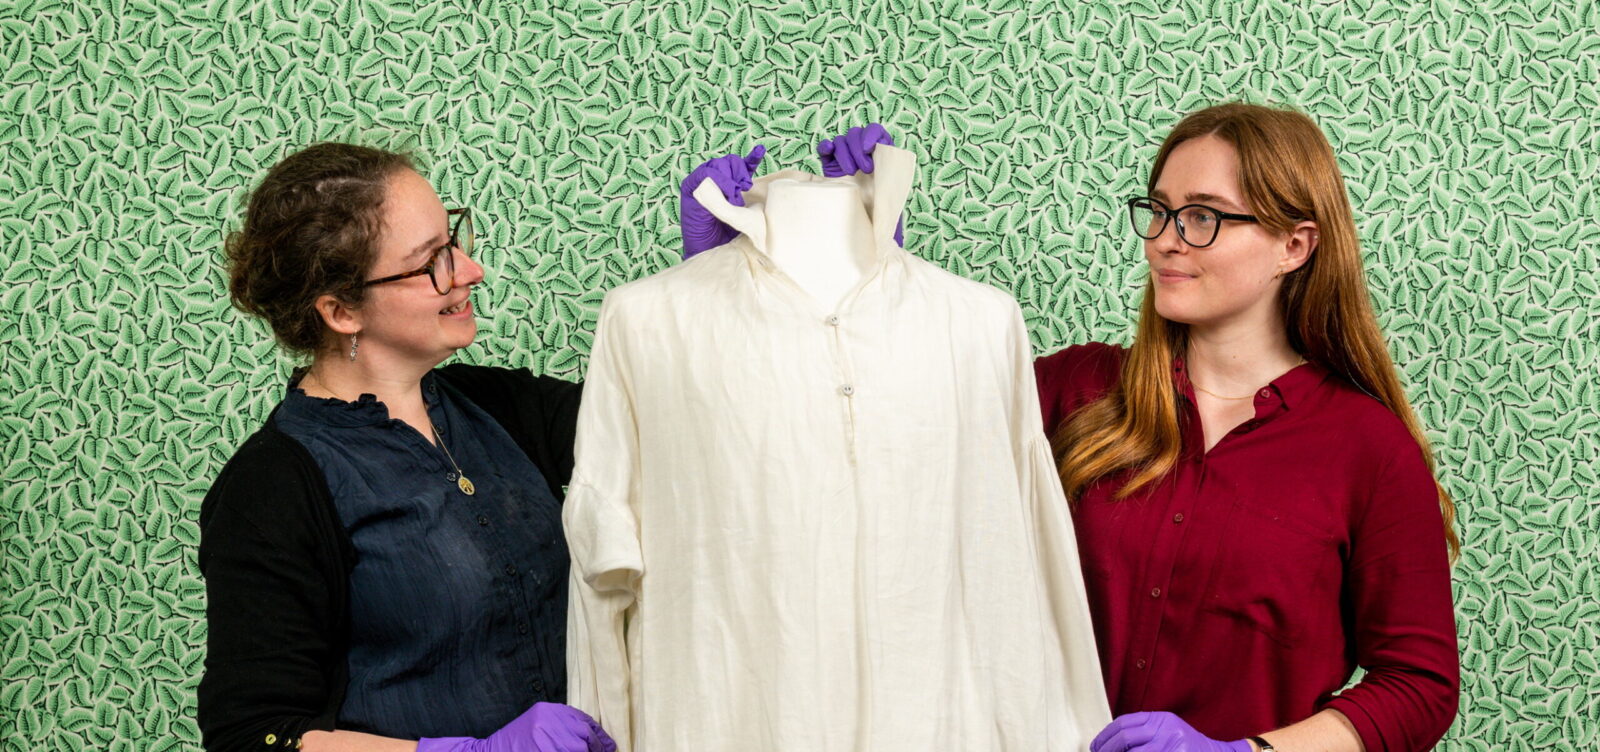 Pictured:  (left/right) Lizzie Dunford and Rebecca Wood with the Colin Firth shirt at the Jane Austen's House, Museum in Chawton, Hampshire.

It was once voted the most memorable moment in British TV drama history.  Now fans of Colin Firth's iconic portrayal of Pride and Prejudice's Mr Darcy can see in the flesh the famous sodden white shirt in which he enchanted Elizabeth Bennet.

But ardent admirers of both the classic novel and the Oscar-winning actor have been teasingly warned that hugging the garment would be a step too far.  The shirt is the centrepiece of a major new exhibition opening today (Saturday) at Jane Austen's House in Hampshire.  SEE OUR COPY FOR DETAILS.

© Jordan Pettitt/Solent News & Photo Agency
UK +44 (0) 2380 458800